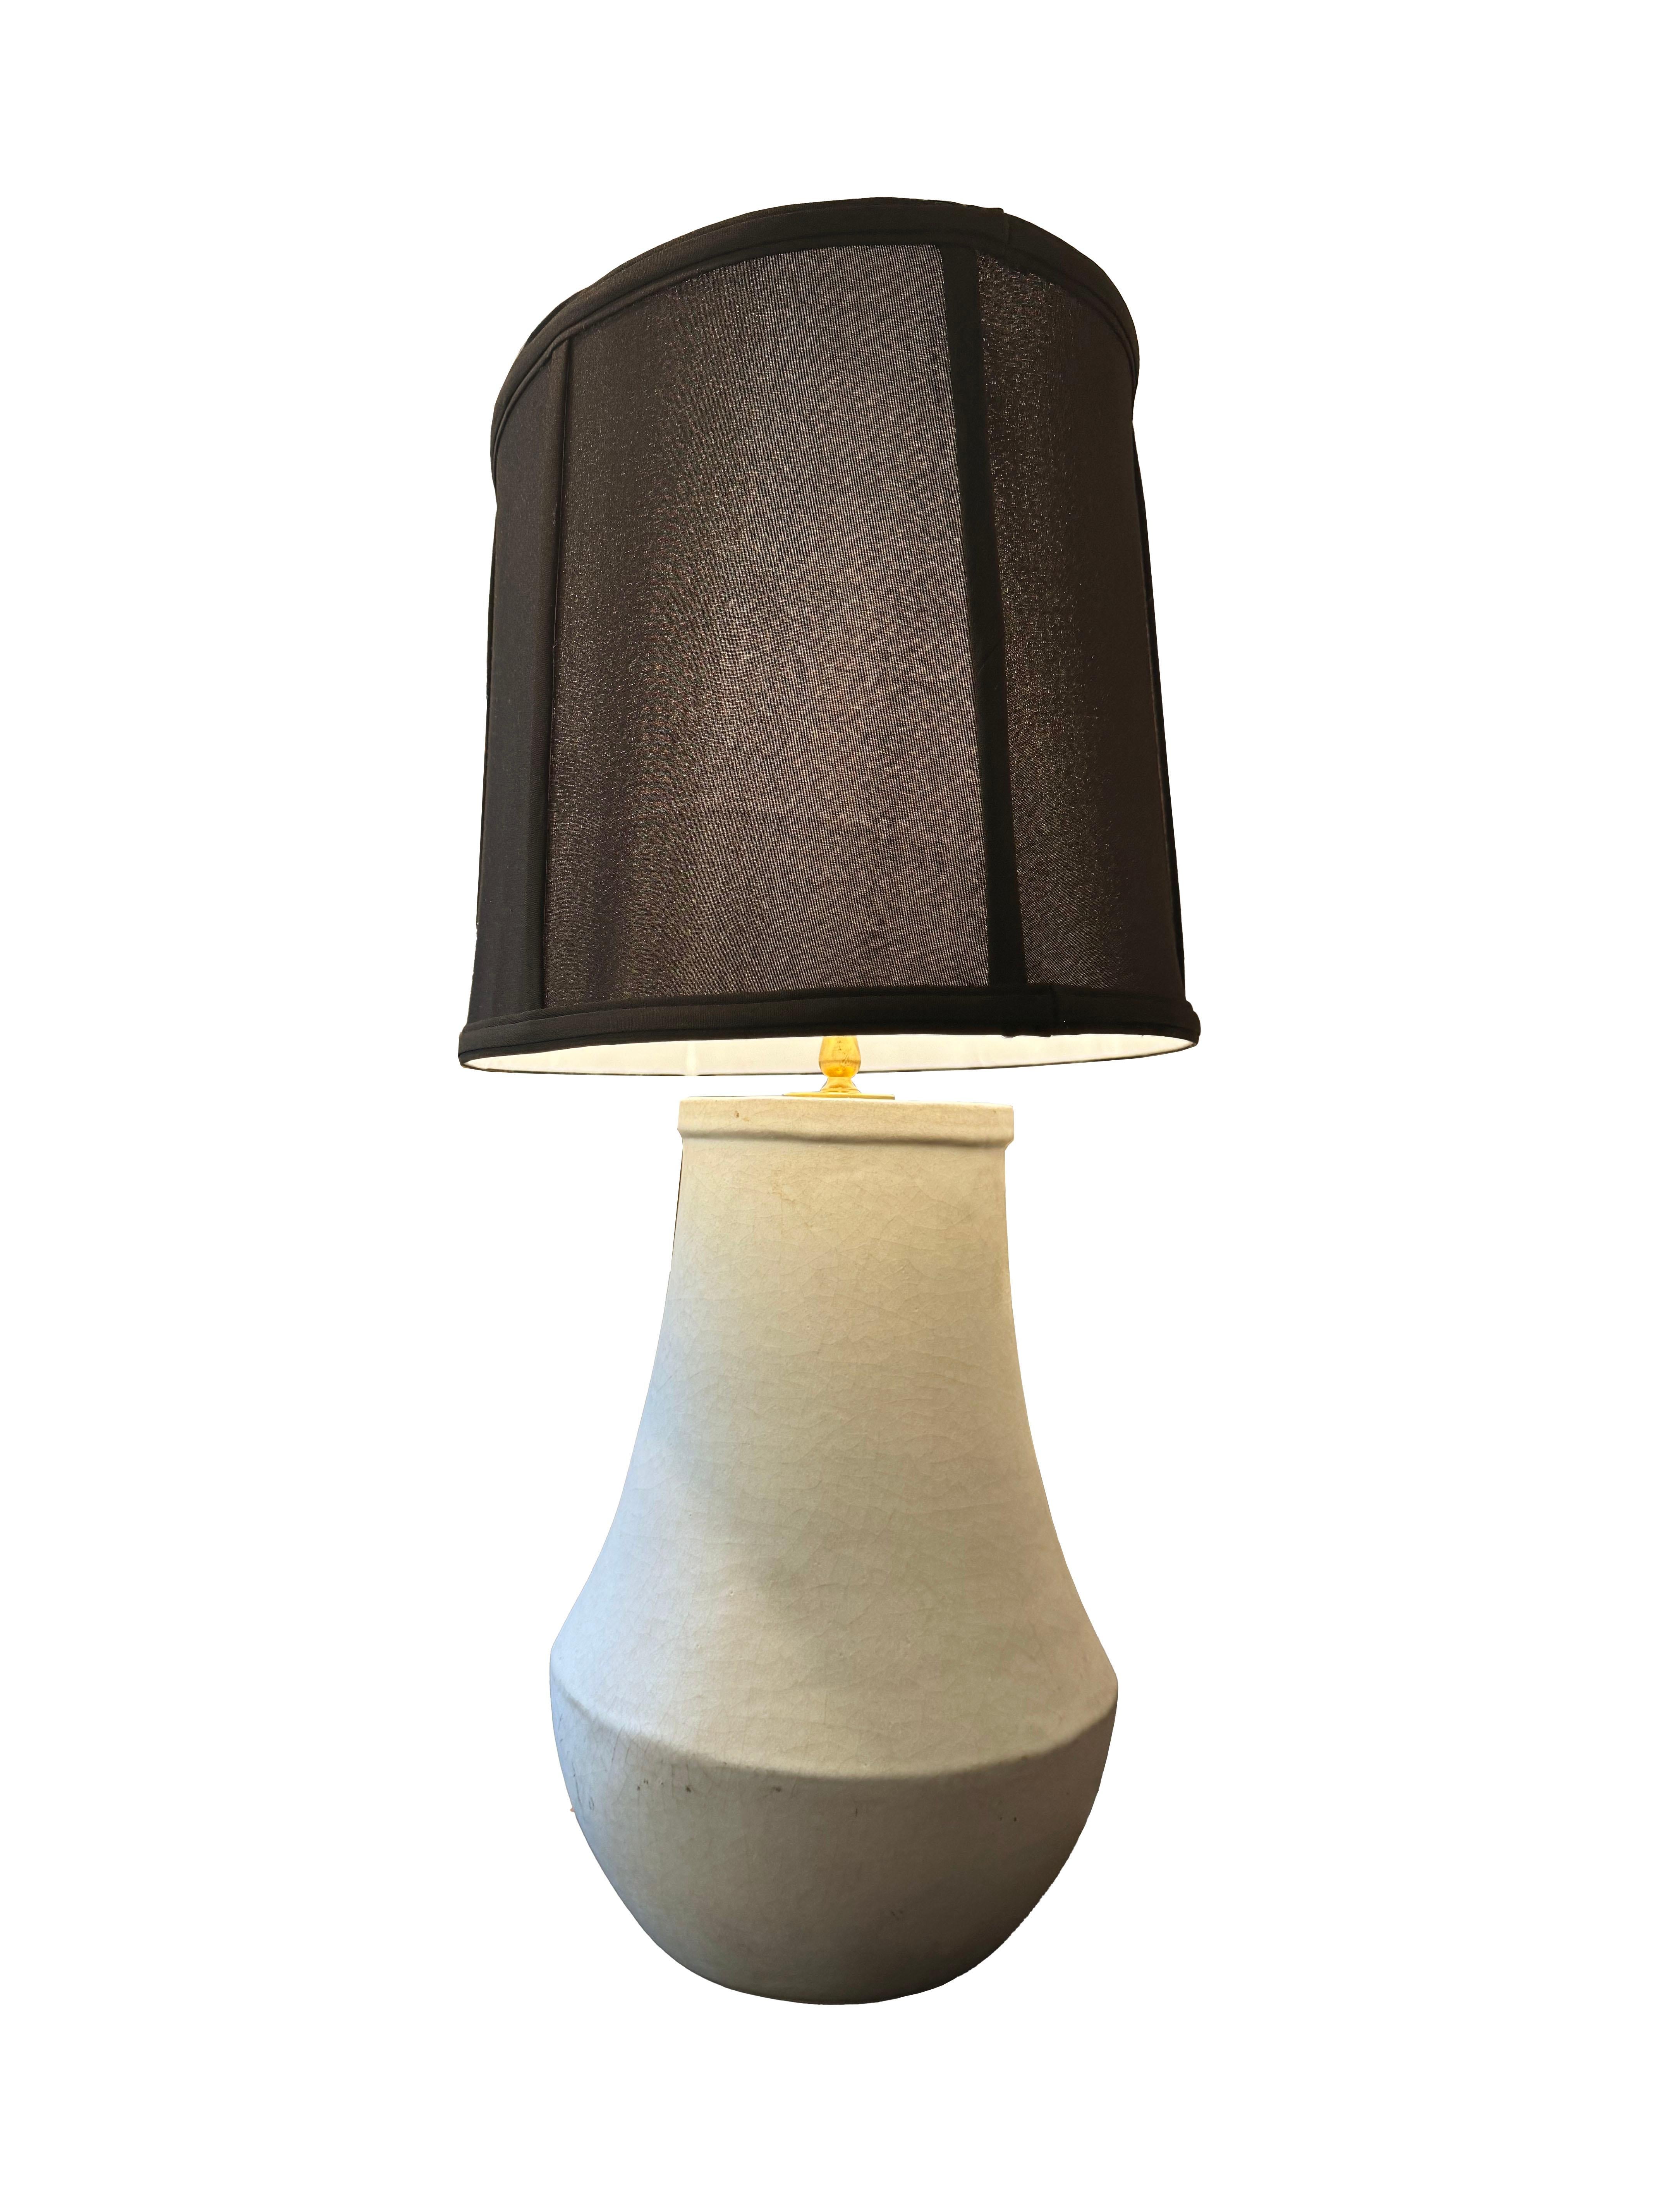 American Rose Tarlow Lamp w/ Black Oval Shade For Sale